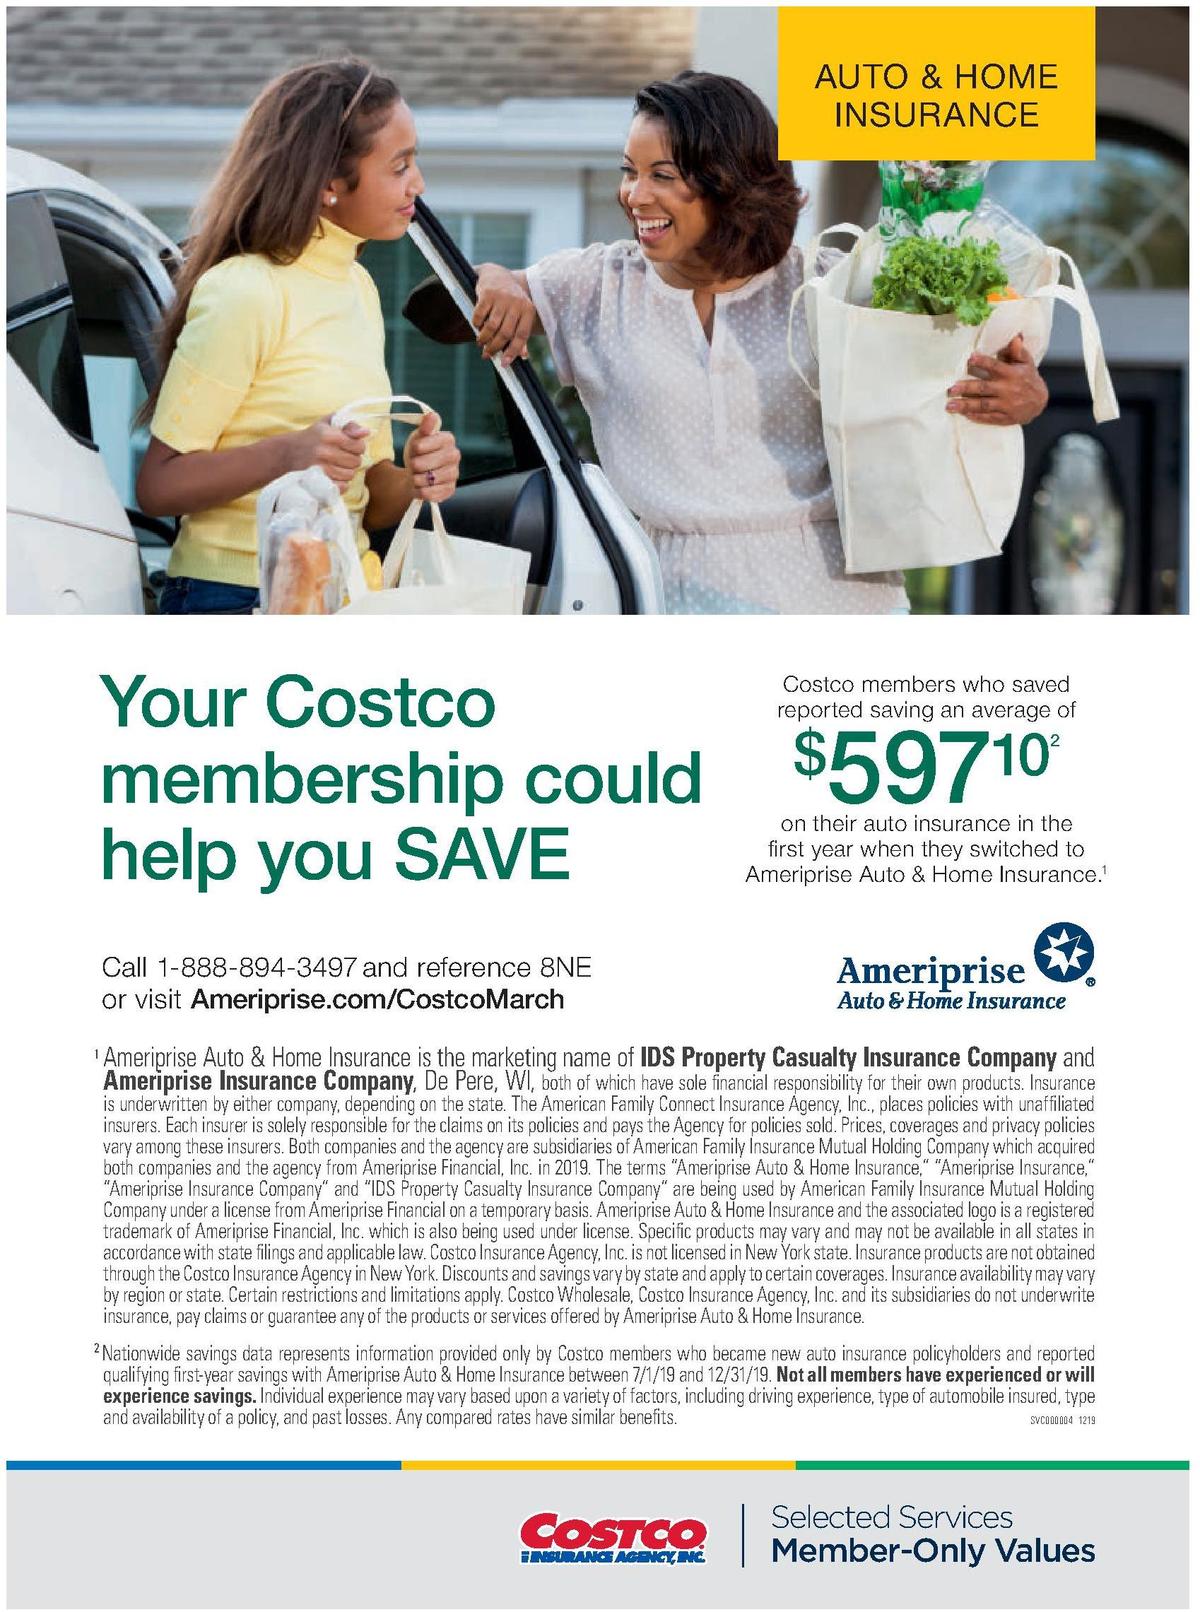 Costco Connection Special Buys and Warehouse Savings from March 1